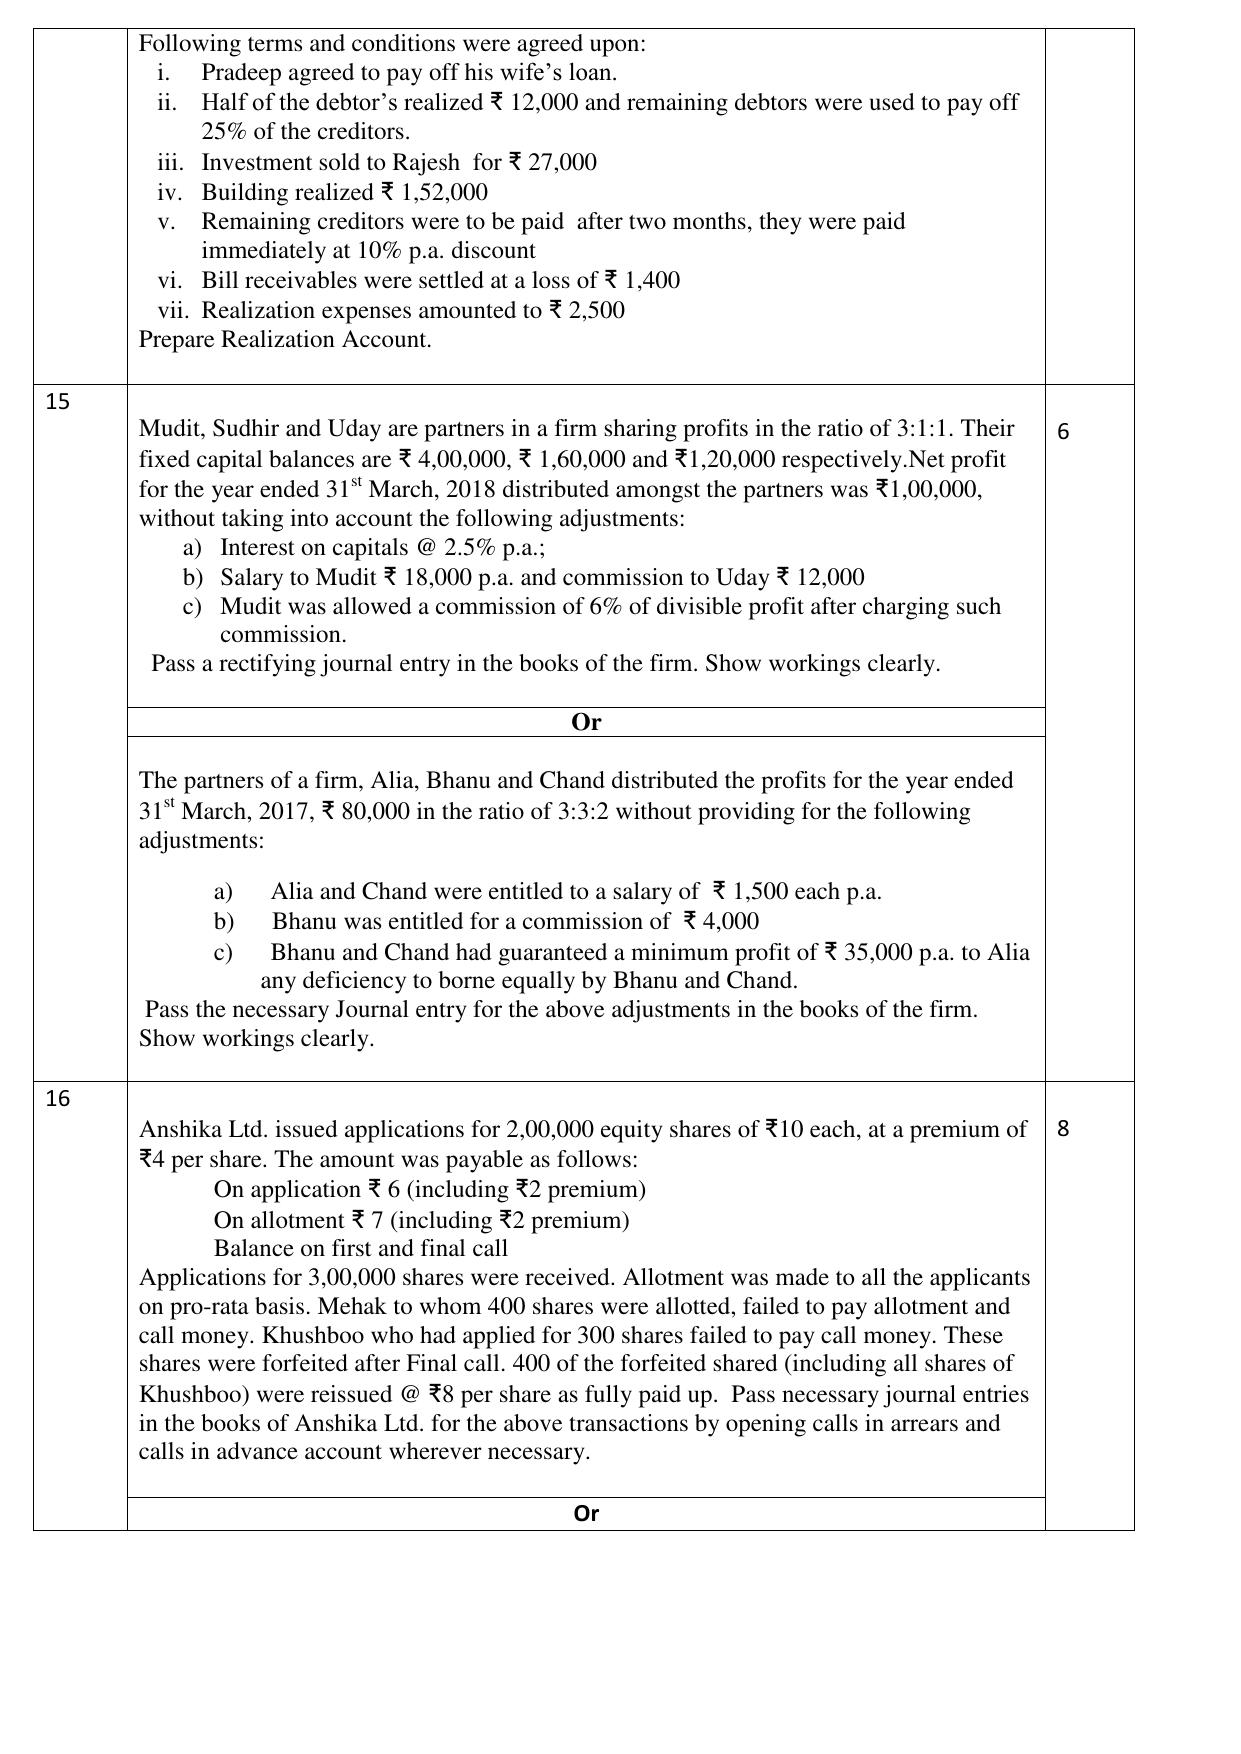 CBSE Class 12 Accountancy-Sample Paper 2018-19 - Page 5